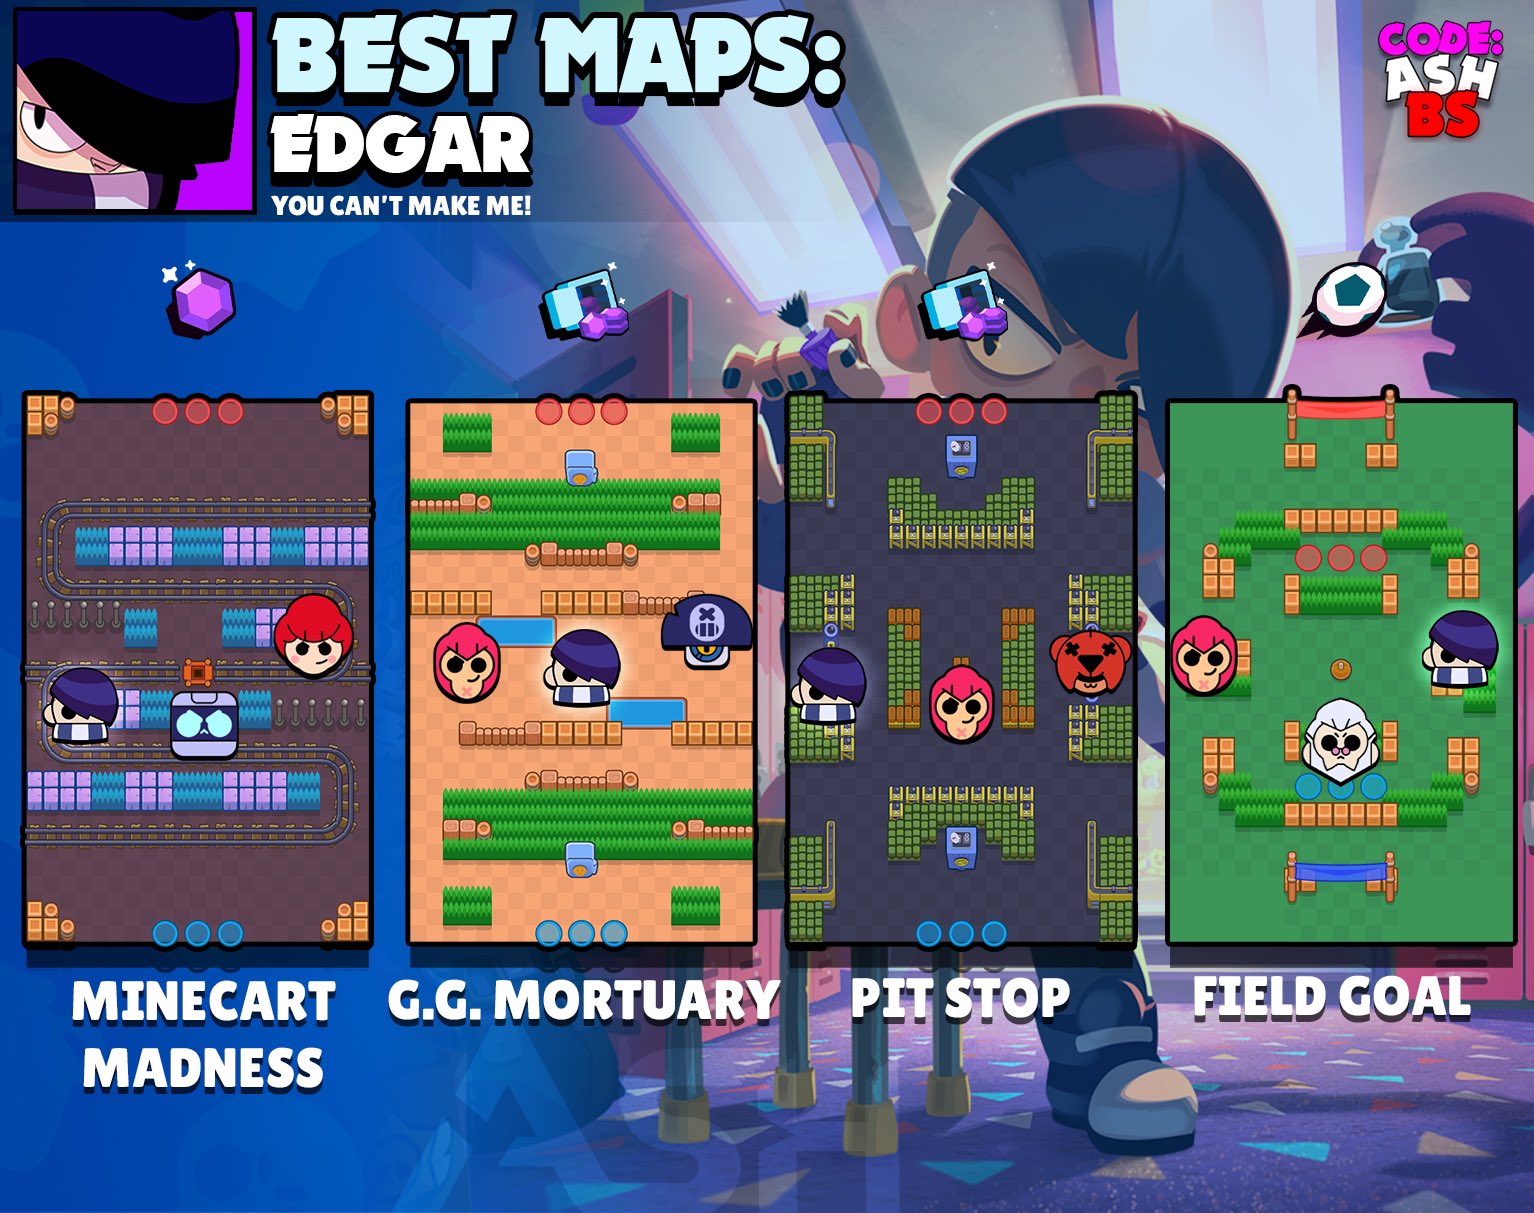 Code: AshBS on X: 8-Bit tier list for all game modes and the best maps to  use him in with suggested comps. One of the best brawlers in the game! 👾 # BrawlStars